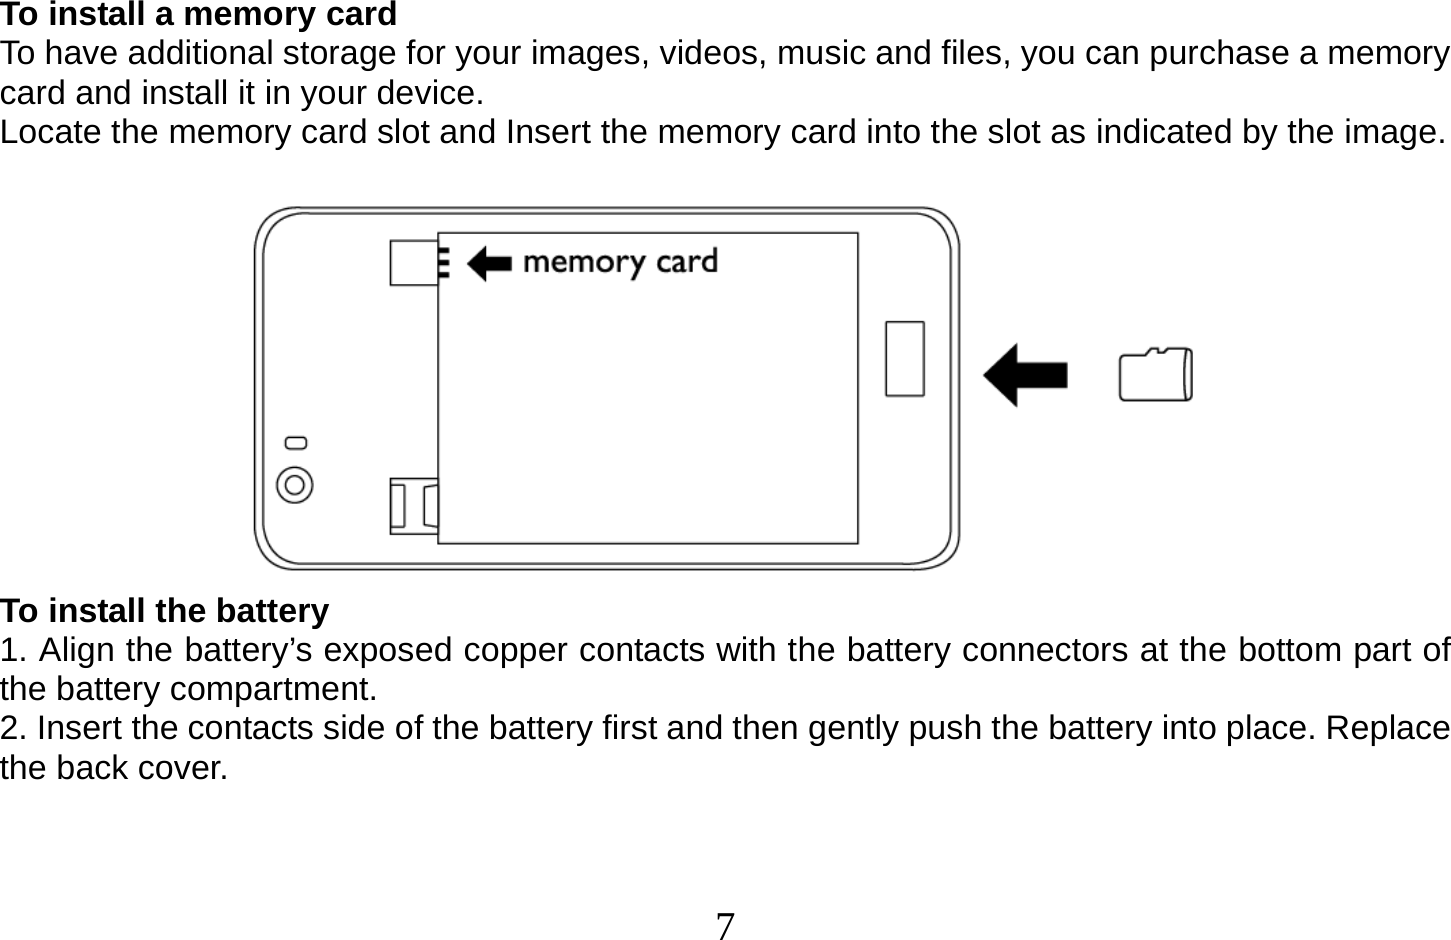  7   To install a memory card To have additional storage for your images, videos, music and files, you can purchase a memory card and install it in your device. Locate the memory card slot and Insert the memory card into the slot as indicated by the image.   To install the battery 1. Align the battery’s exposed copper contacts with the battery connectors at the bottom part of the battery compartment. 2. Insert the contacts side of the battery first and then gently push the battery into place. Replace the back cover.   